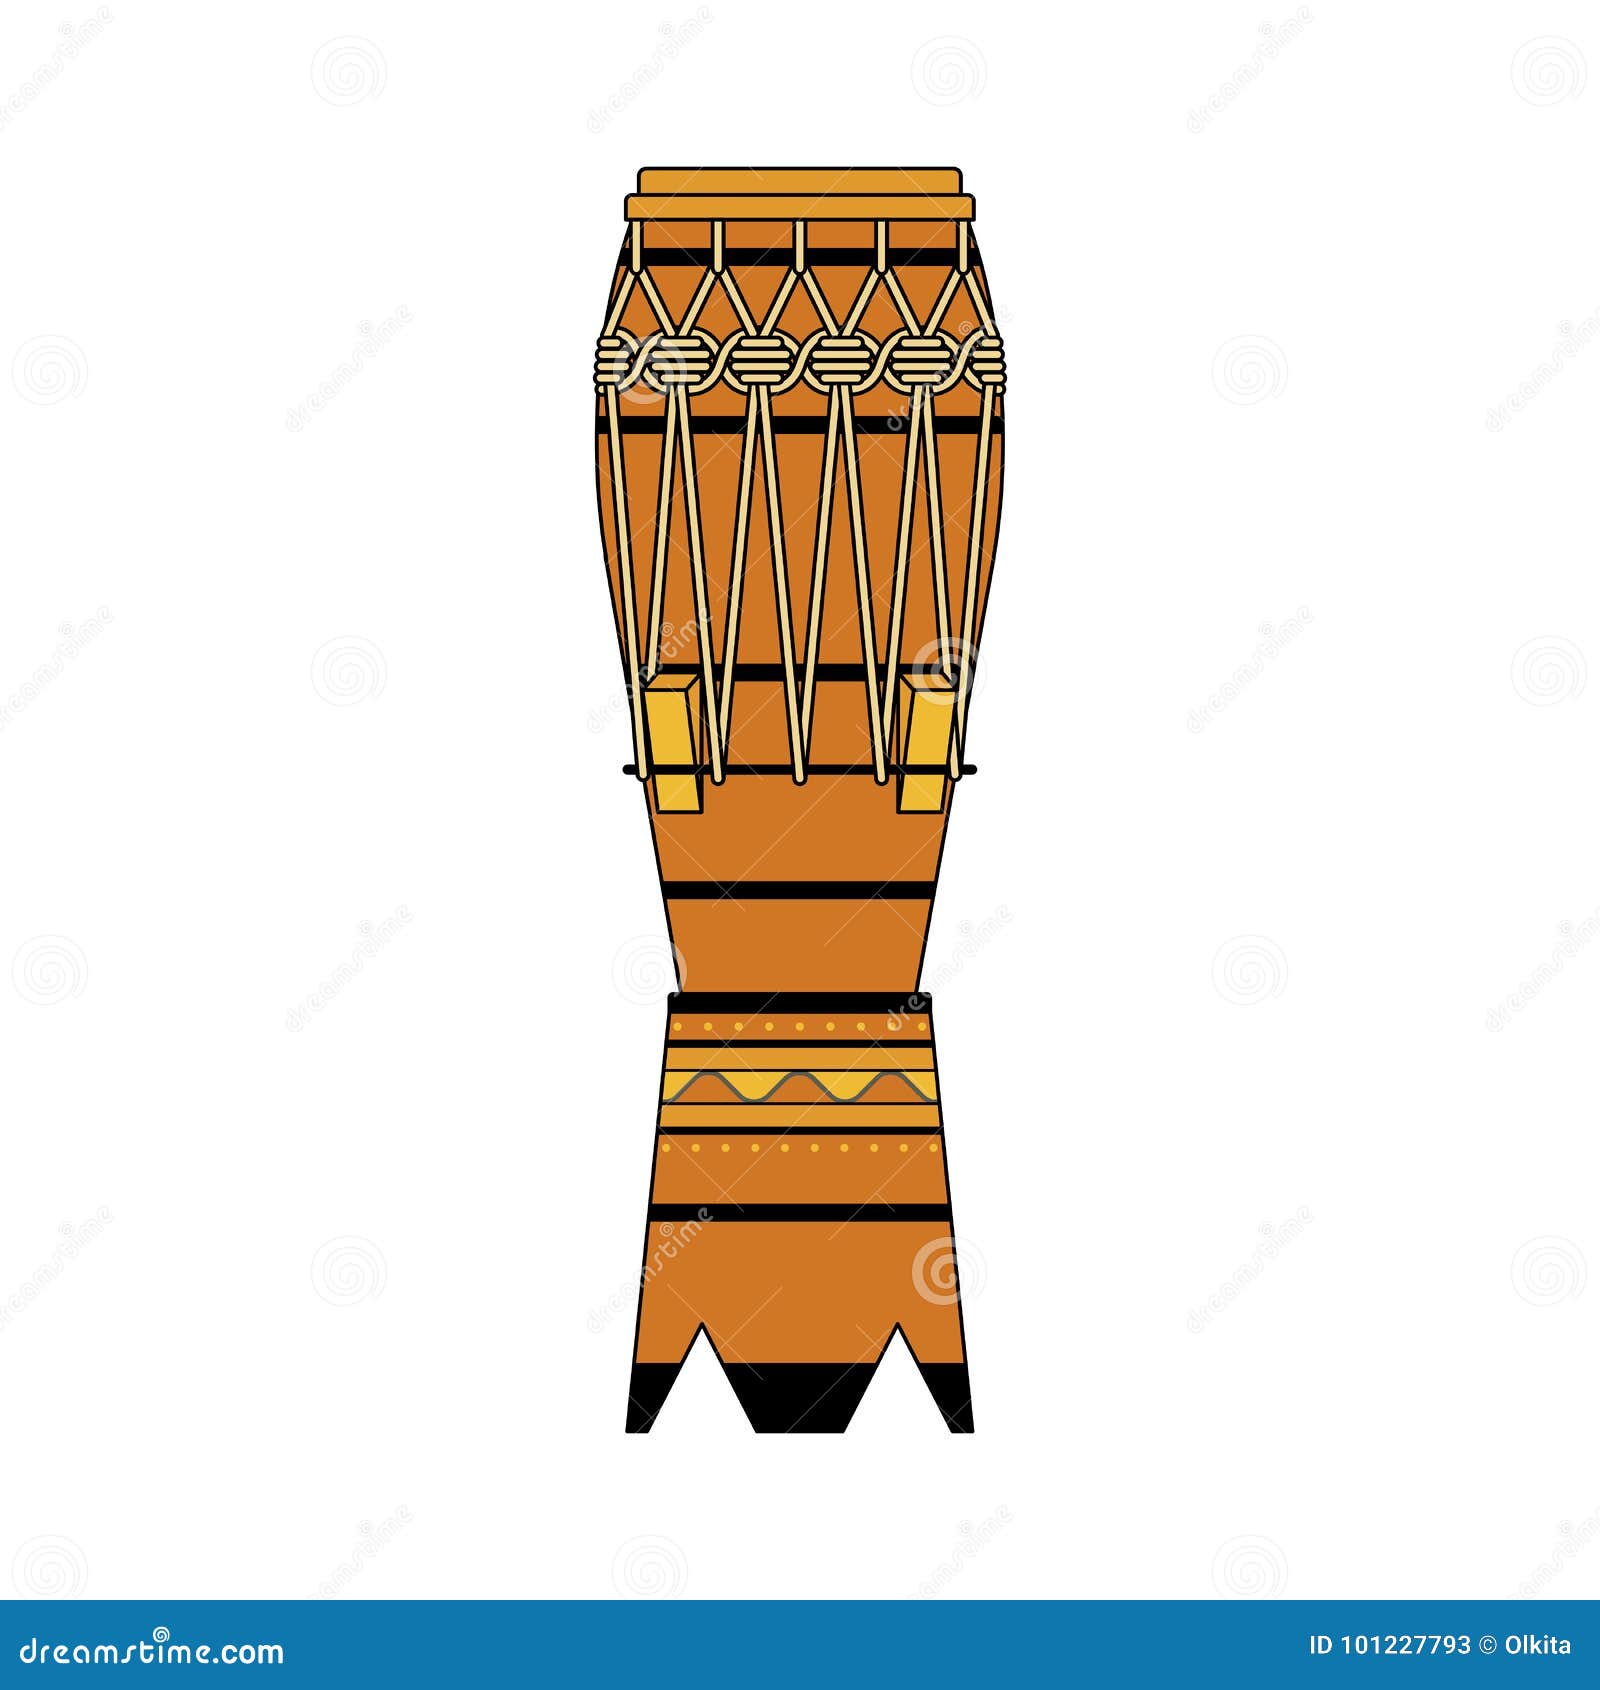  colorful decorative ornate atabaque on white background. colored brazilian musical instrument for bateria of capoeira.